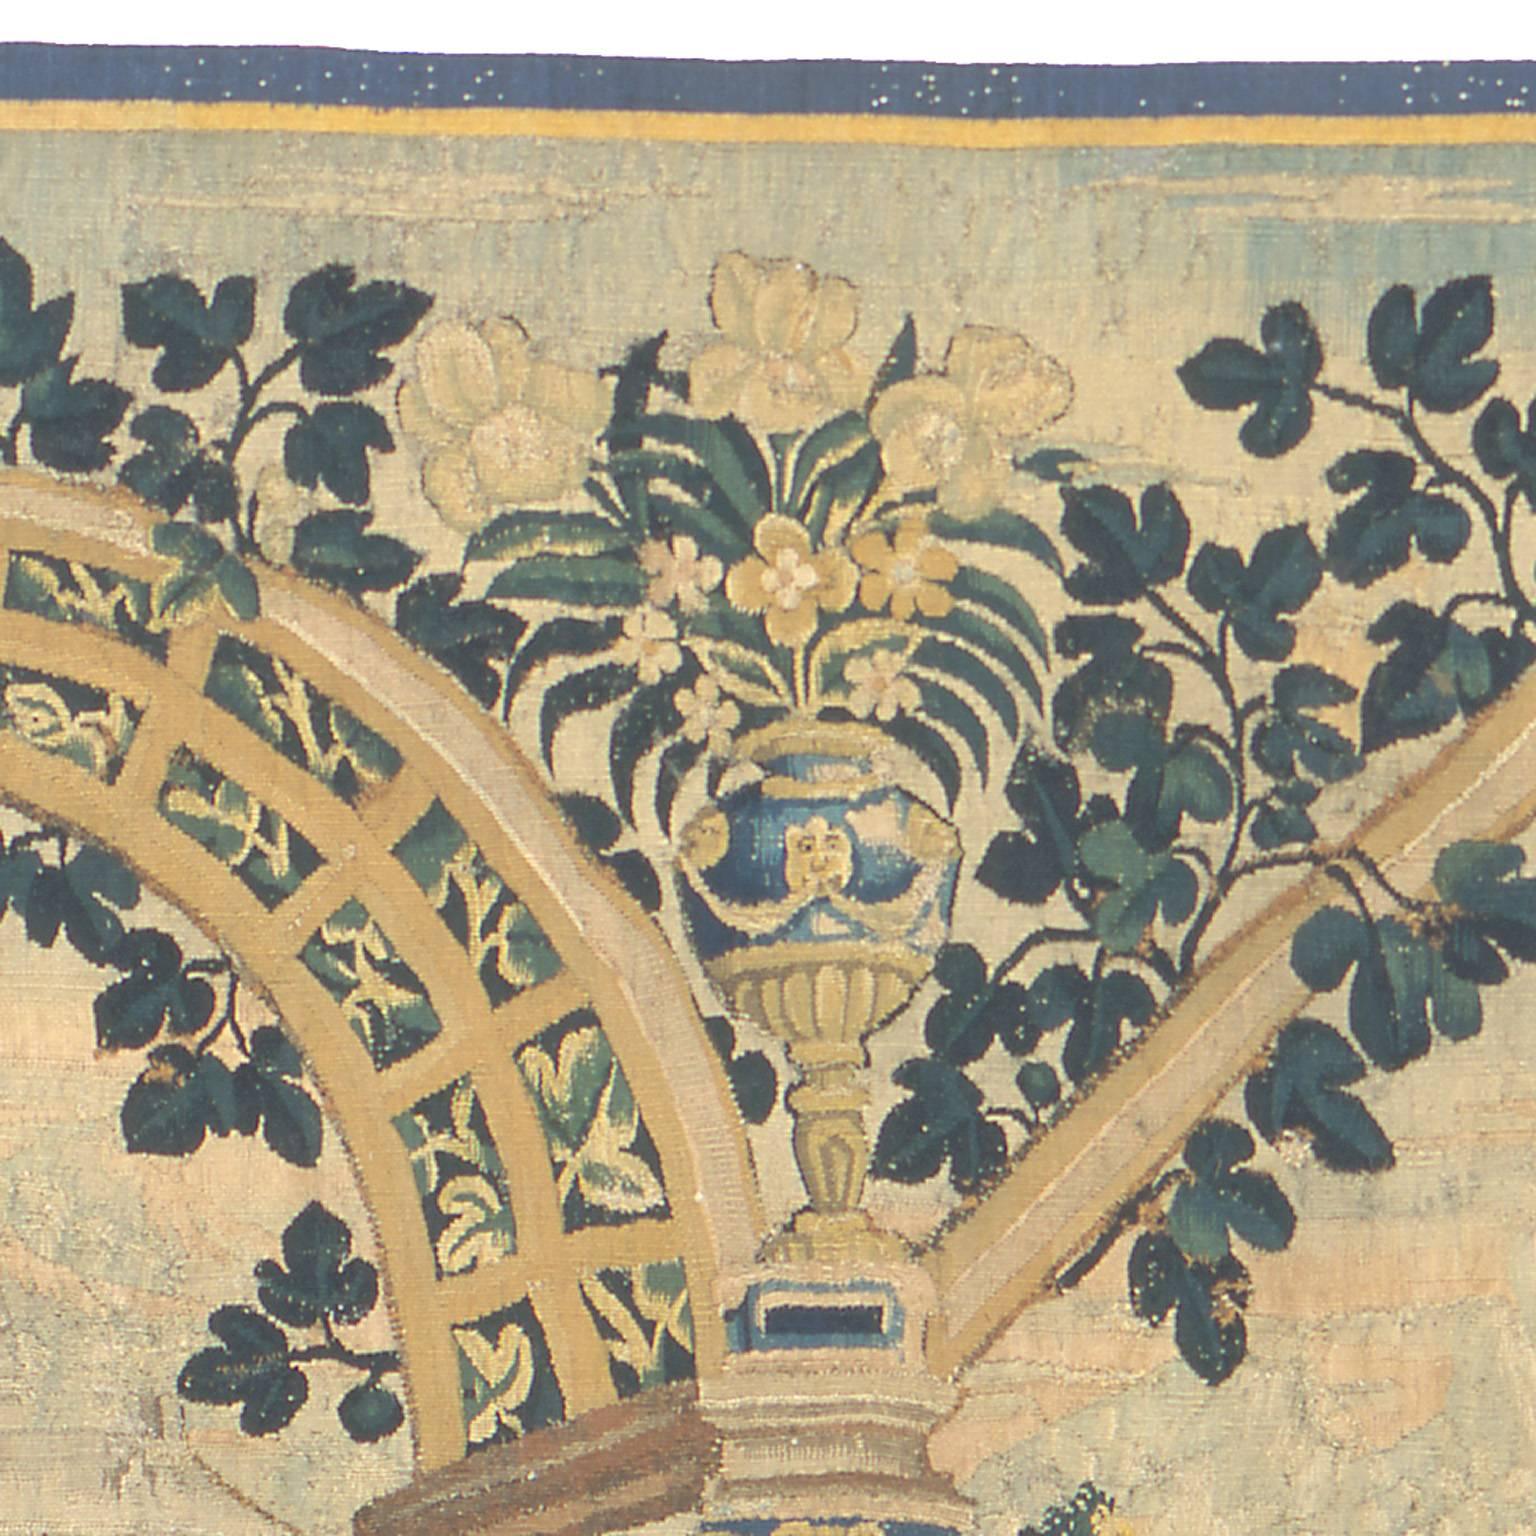 Late 16th century-early 17th century Flemish tapestry.